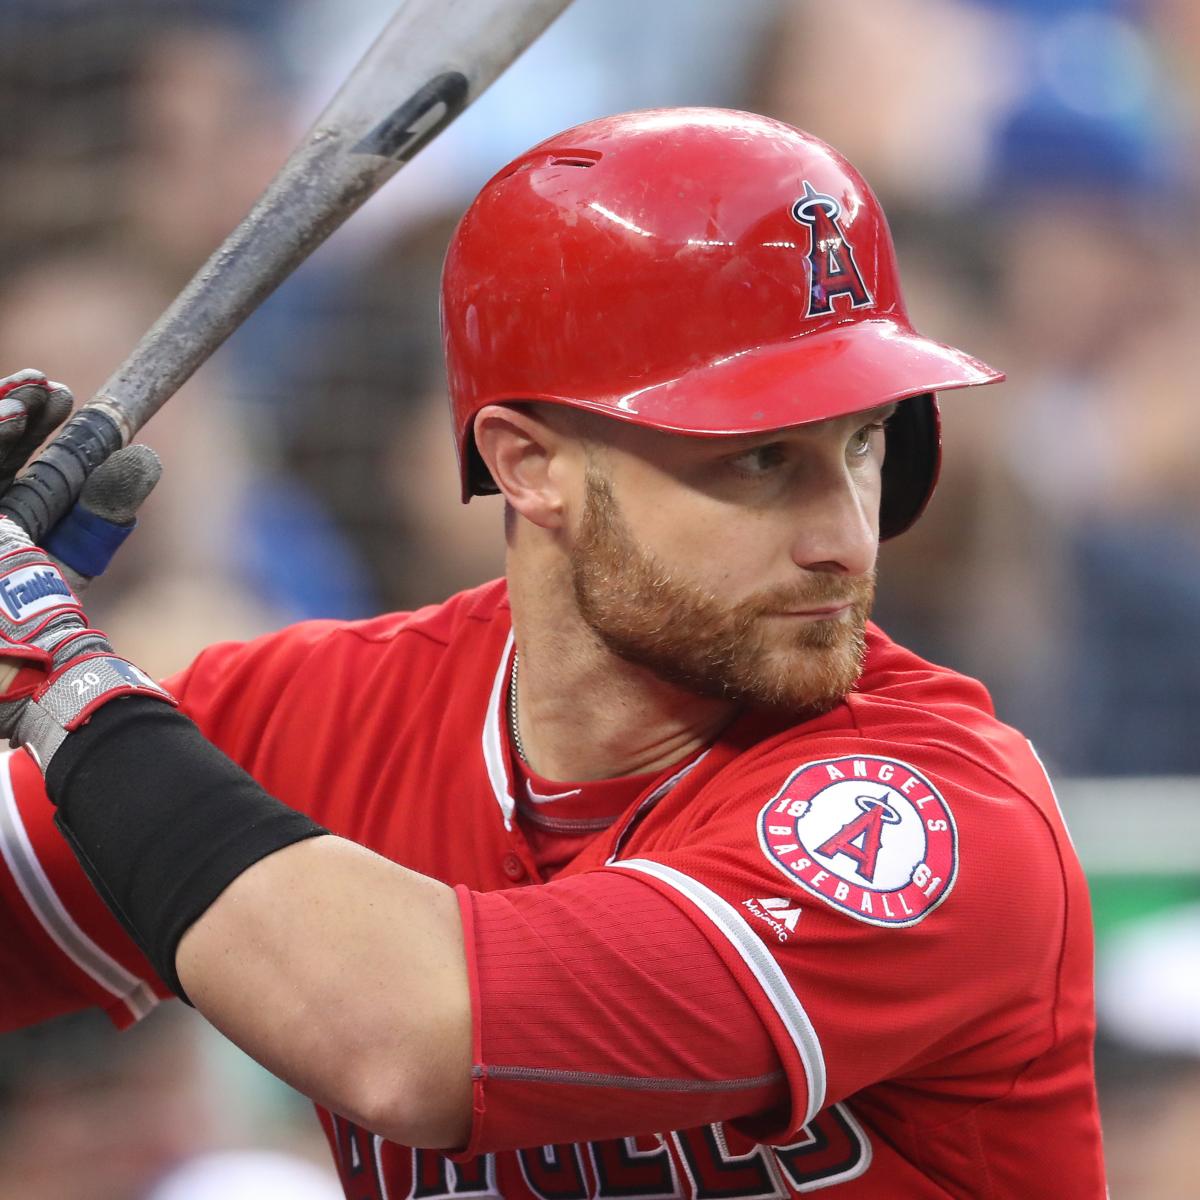 Cubs reportedly interested in signing Jonathan Lucroy